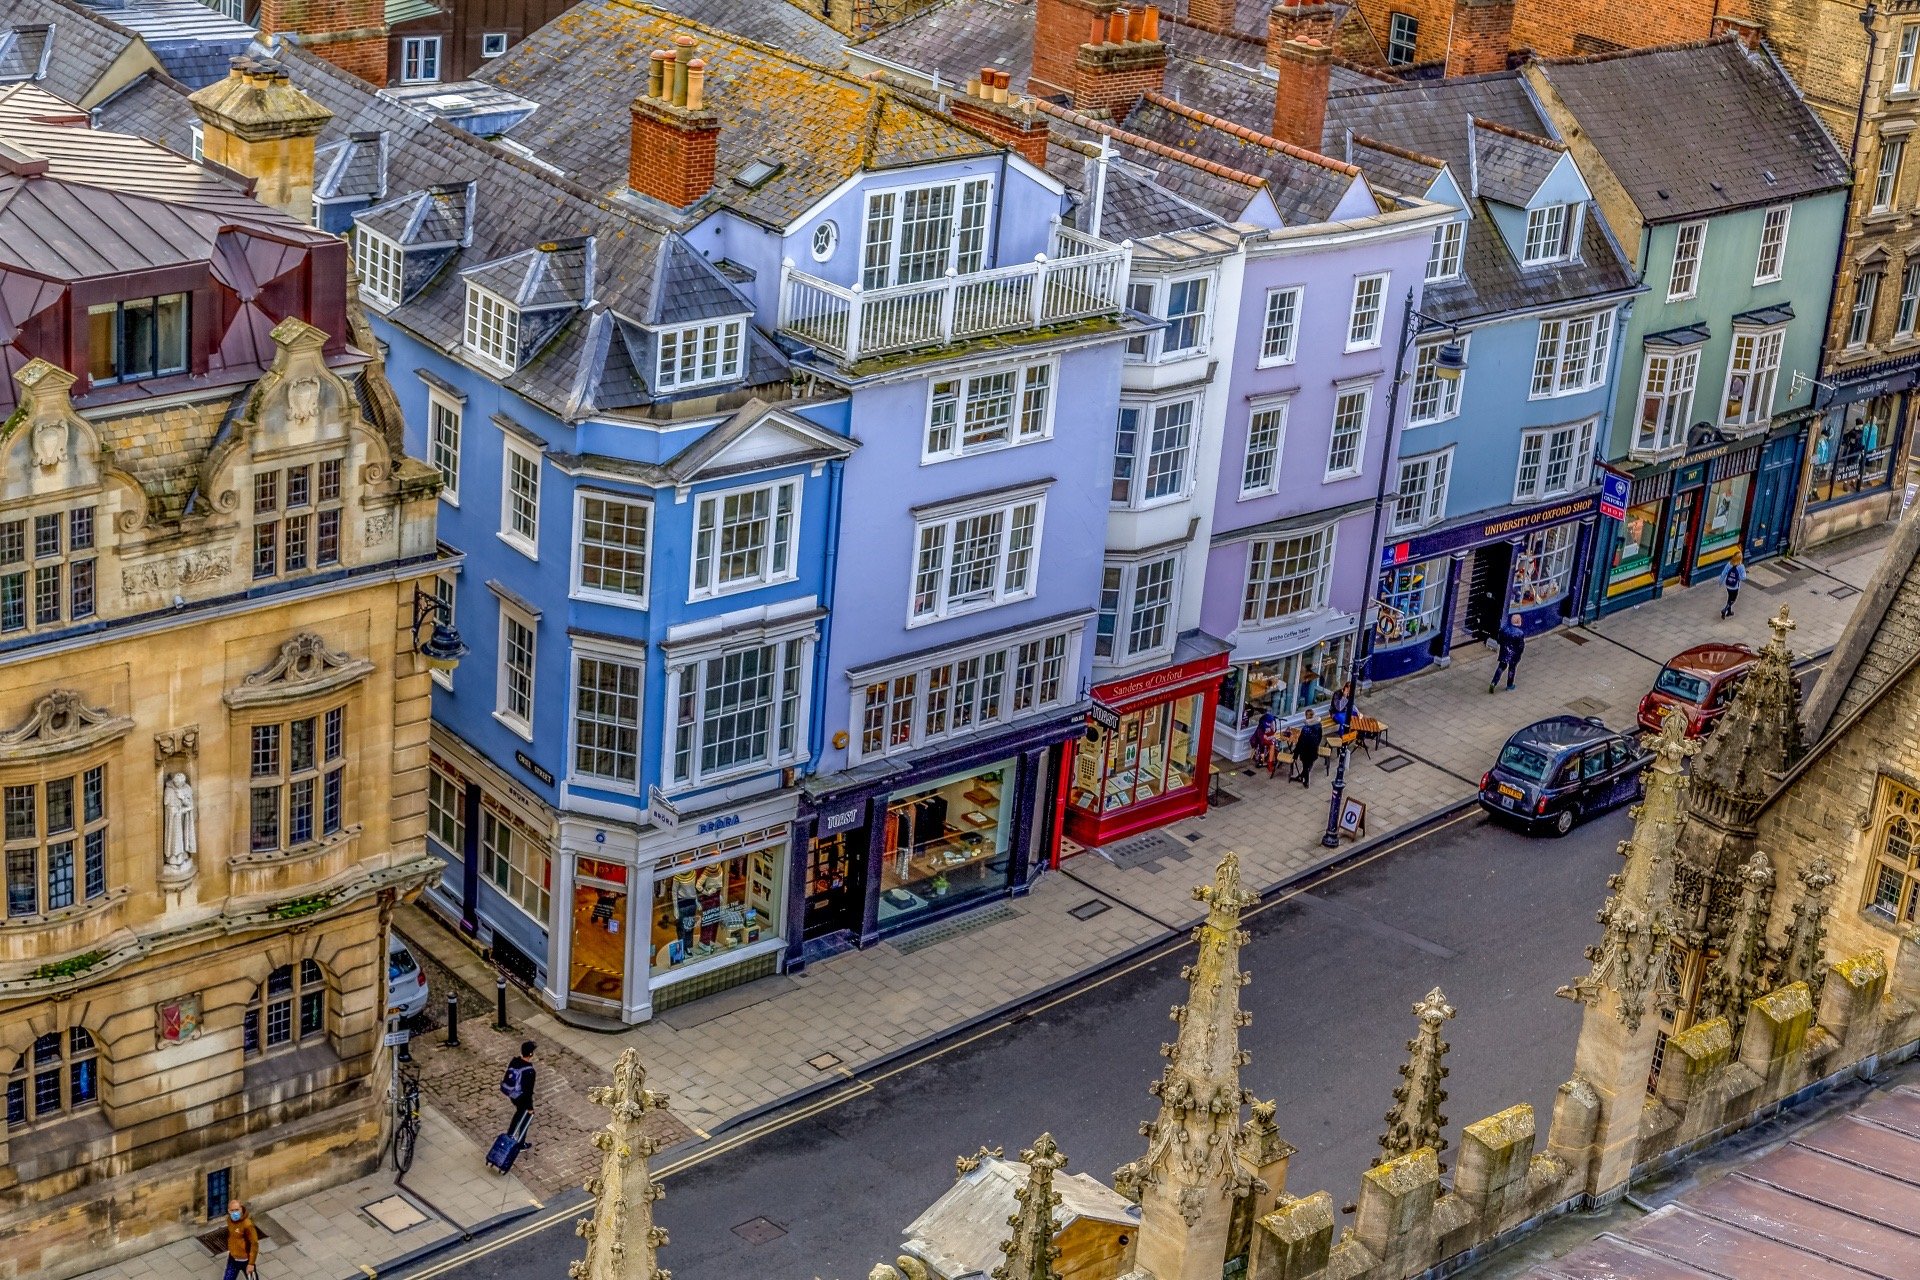 Colourful buildings on the high street